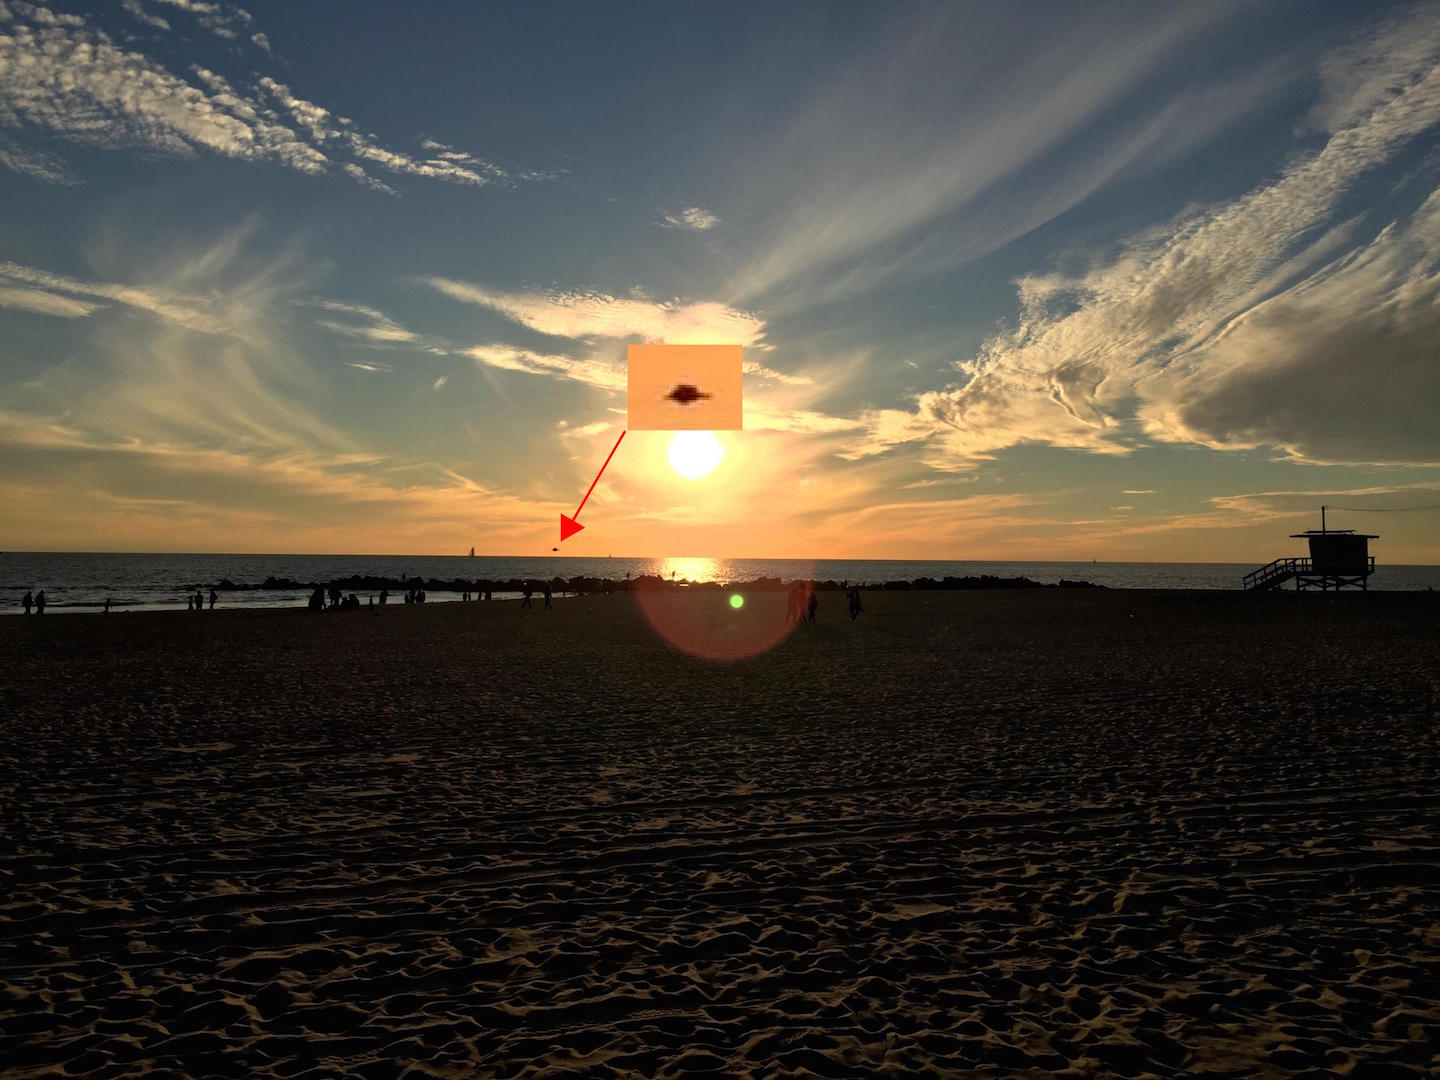 UFO SIGHTINGS DAILY: UFO During Sunset At Venice Beach, California On